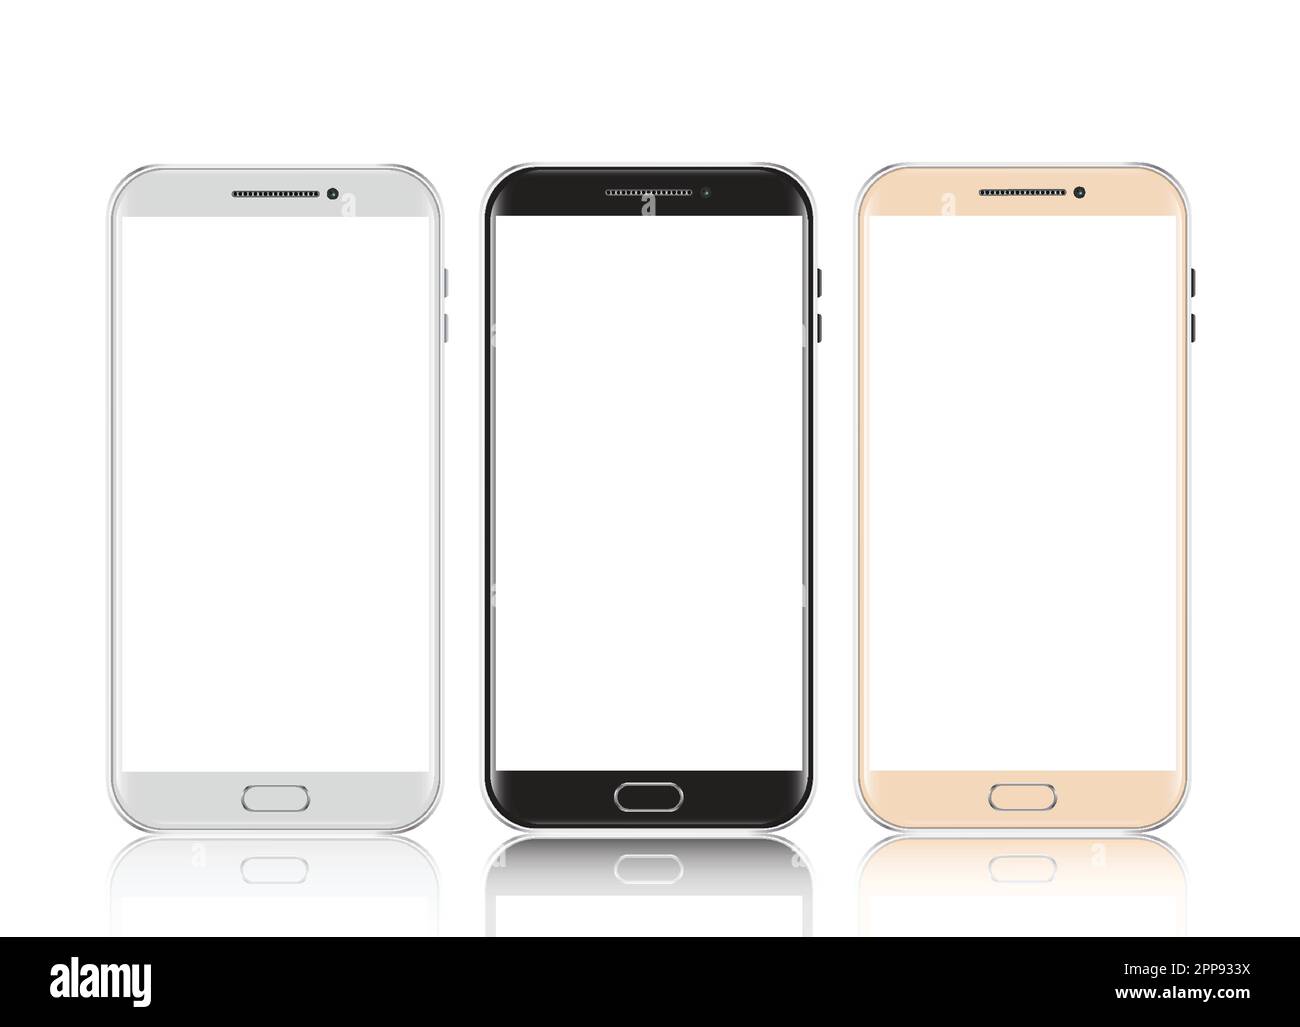 Smartphones black, white and gold. Smartphone isolated. Vector illustration. Stock Vector